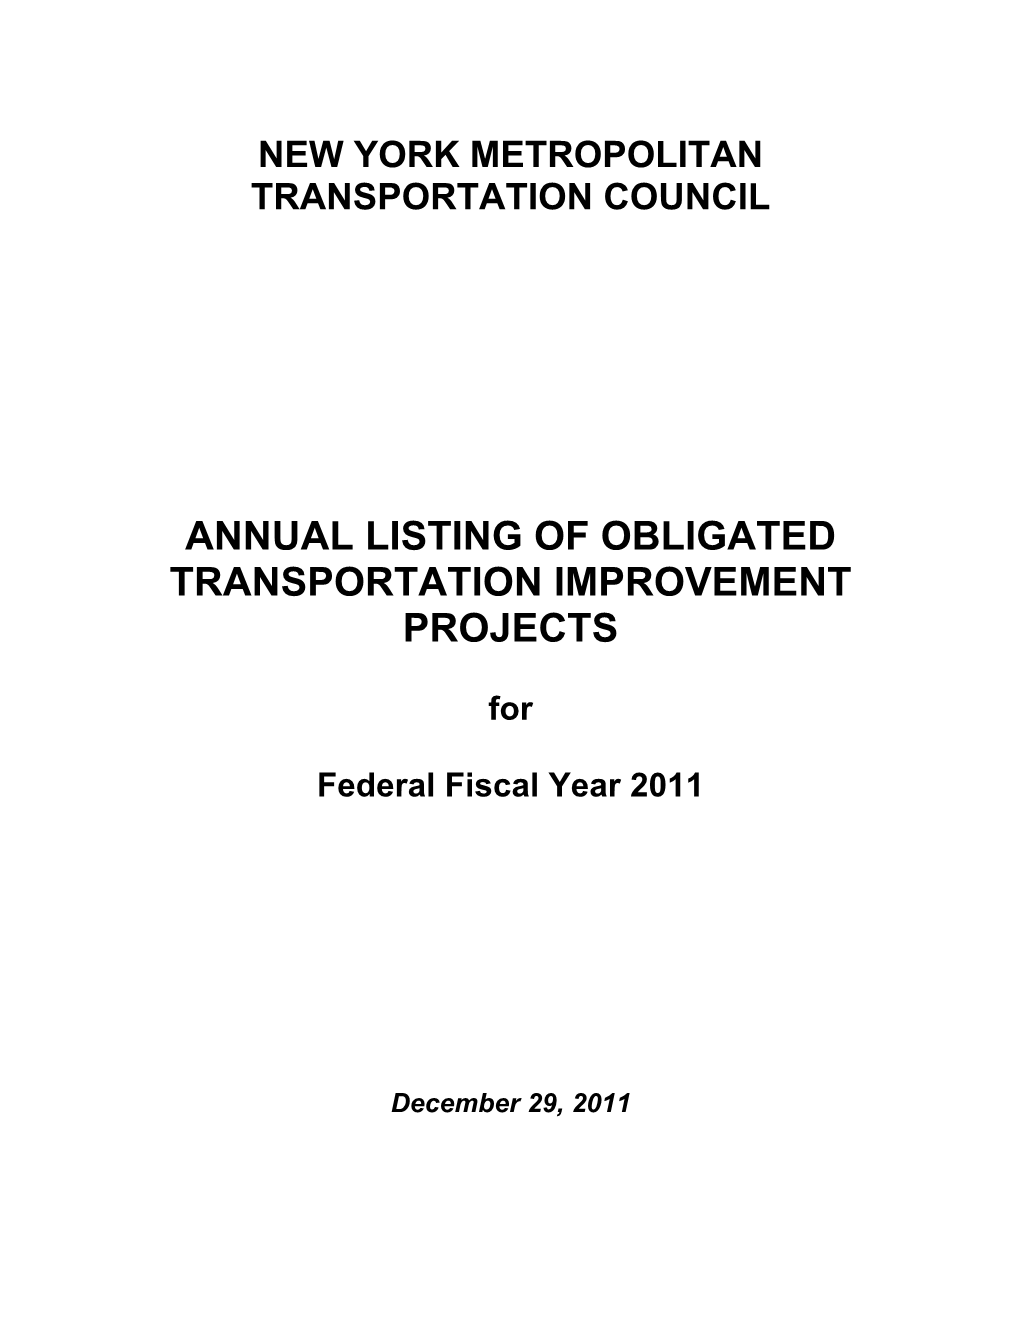 Annual Listing of Obligated Transportation Improvement Projects